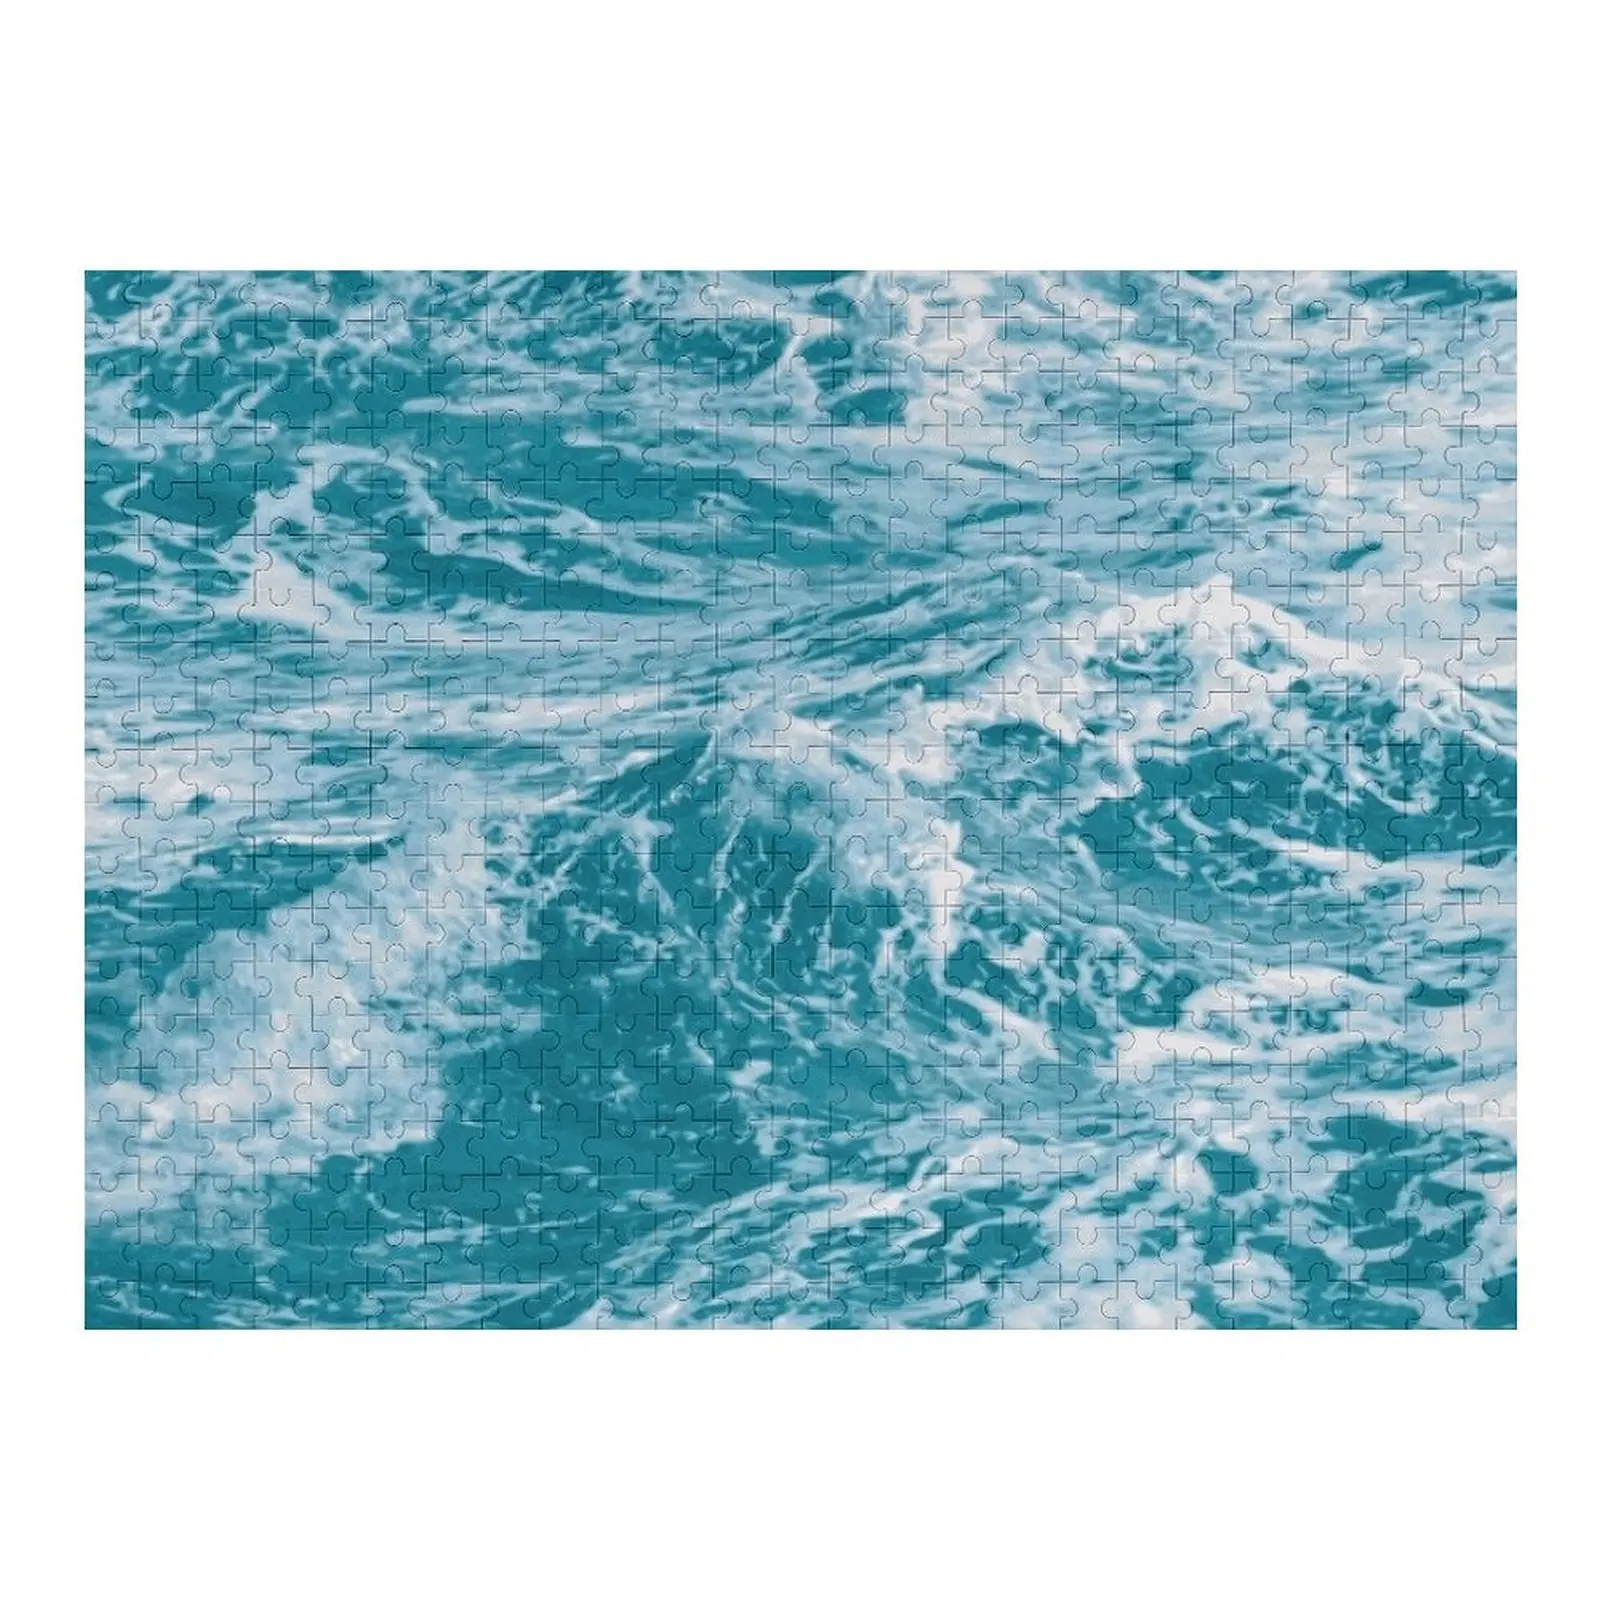 

Ocean Waves Of Sea Blue Jigsaw Puzzle Wooden Jigsaws For Adults Wood Photo Personalized Custom With Photo Wood Animals Puzzle